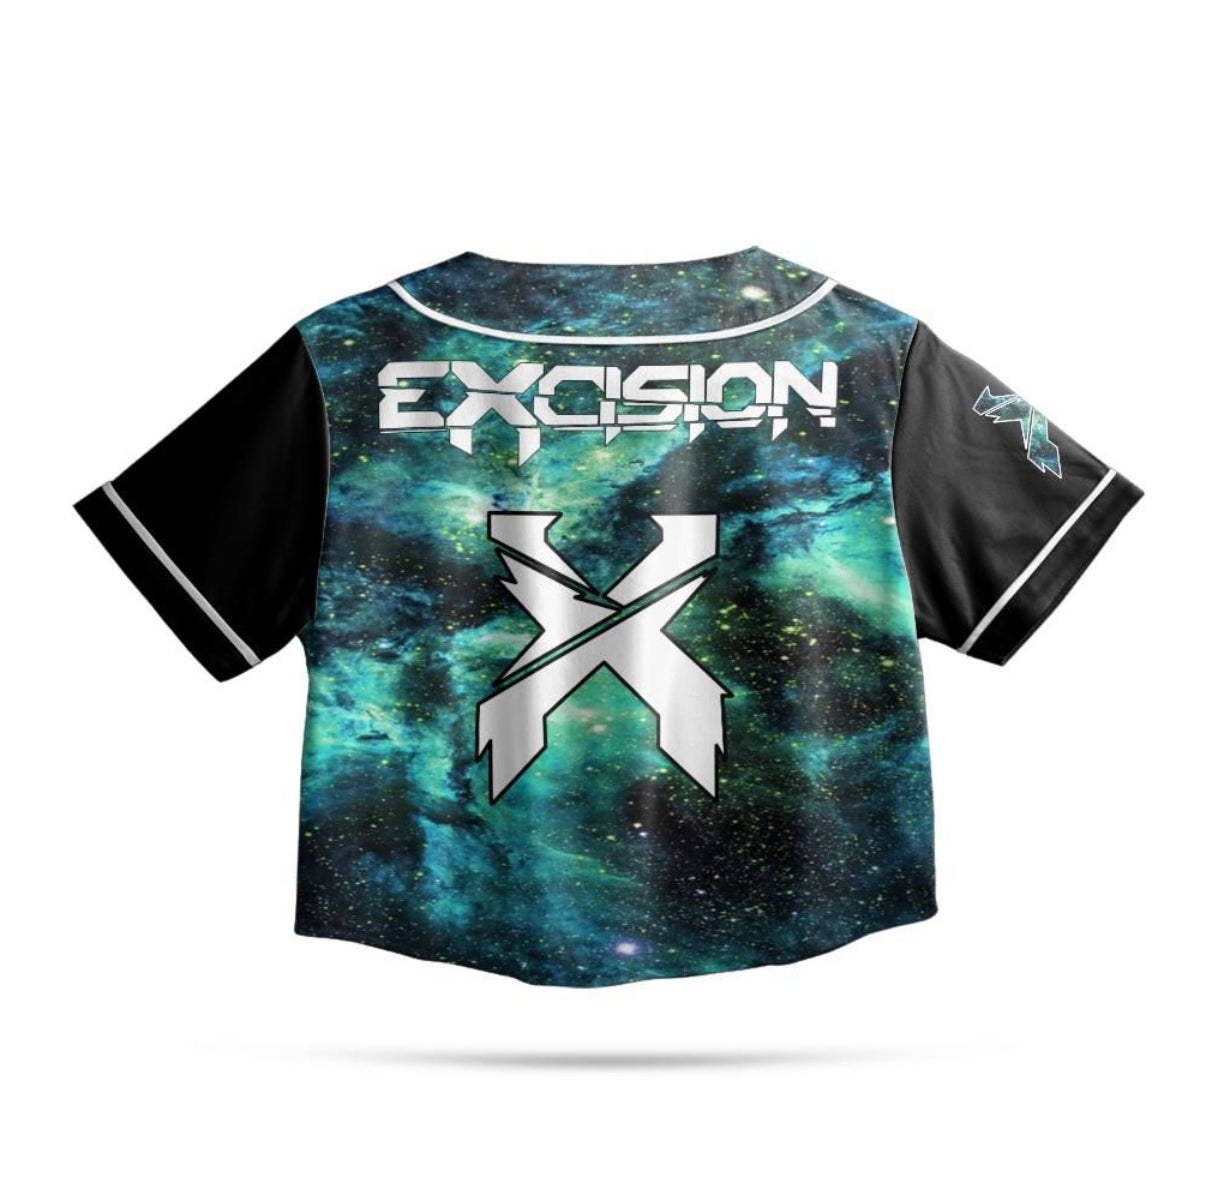 excision jersey for sale